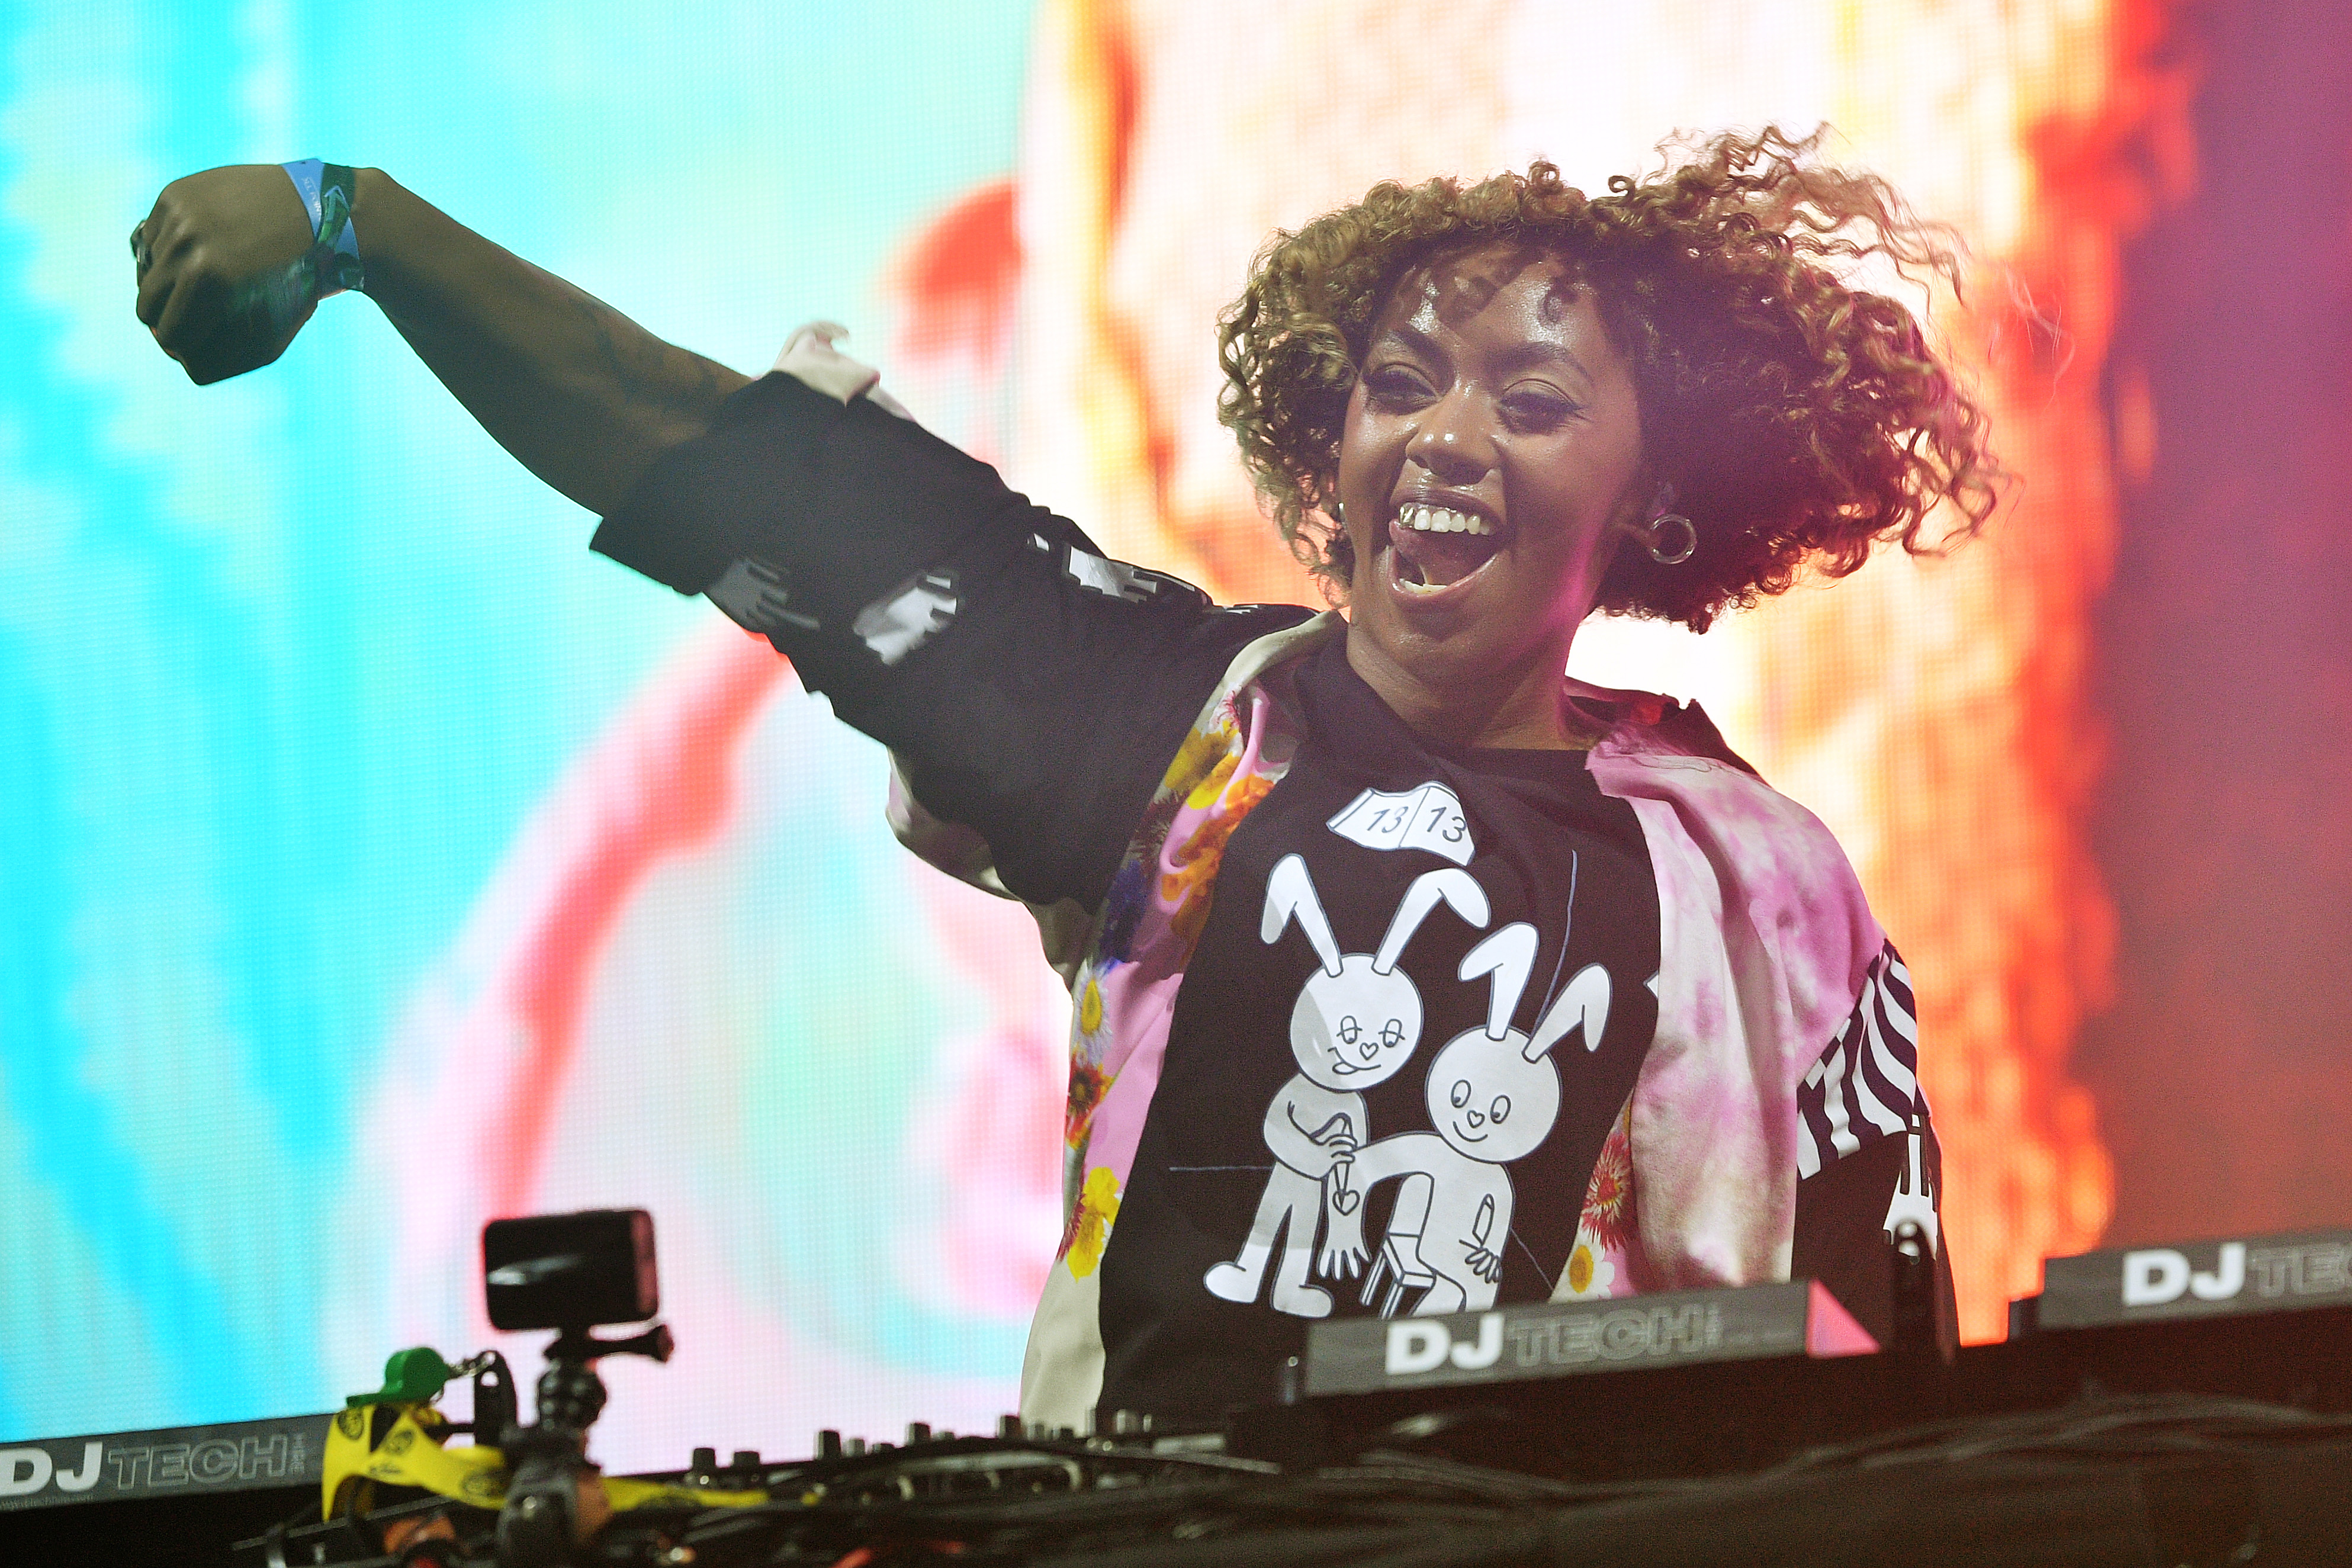 DJ LP Giobbi performs energetically, raising a fist, and wearing a graphic shirt with bunny illustrations, standing at a DJ booth